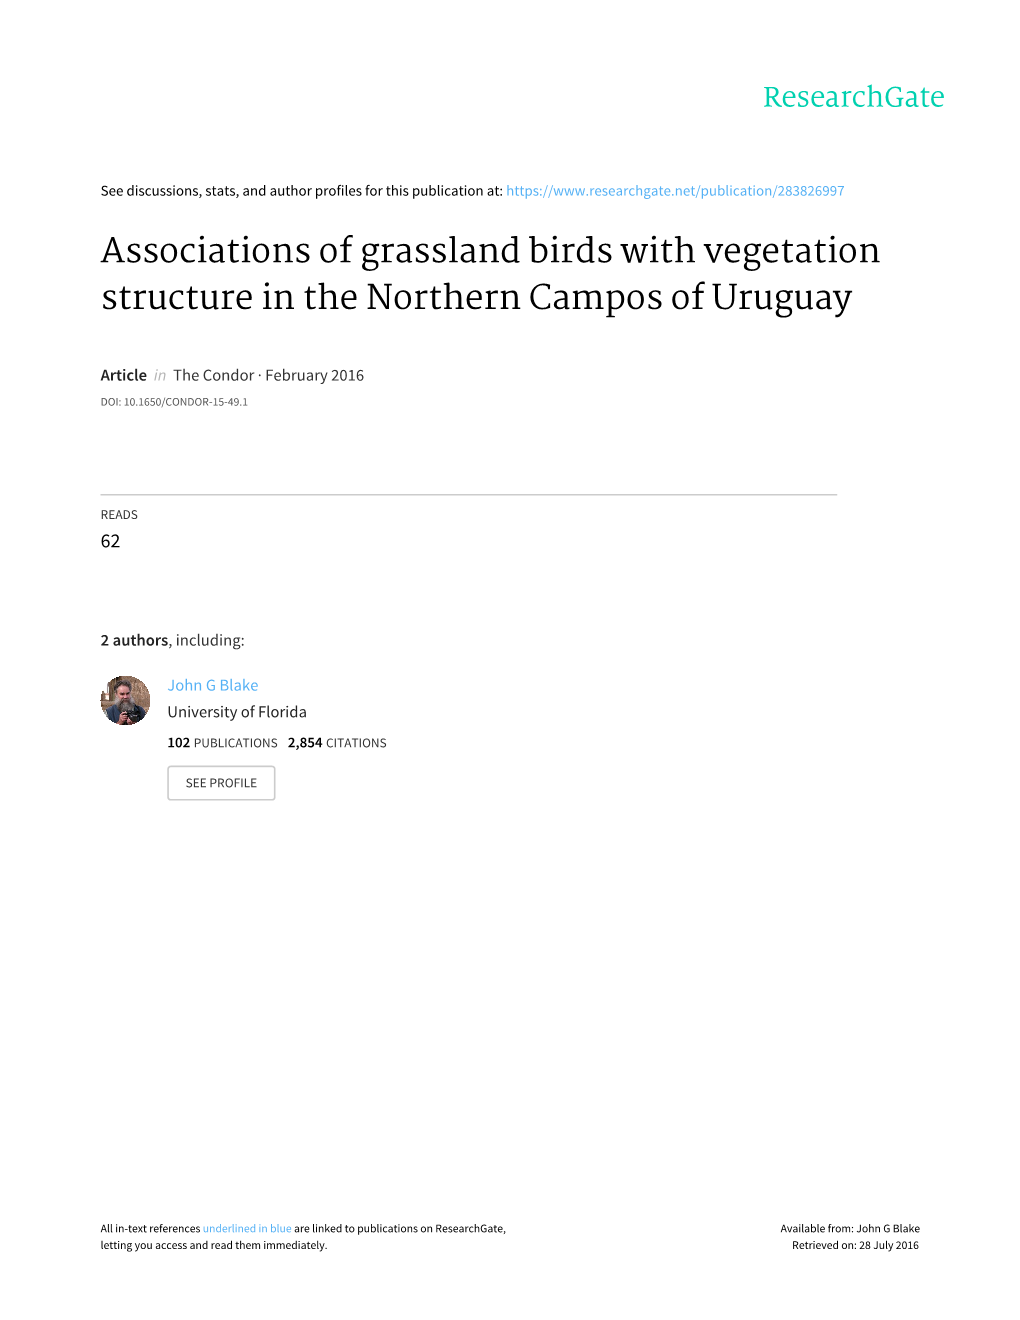 Associations of Grassland Birds with Vegetation Structure in the Northern Campos of Uruguay